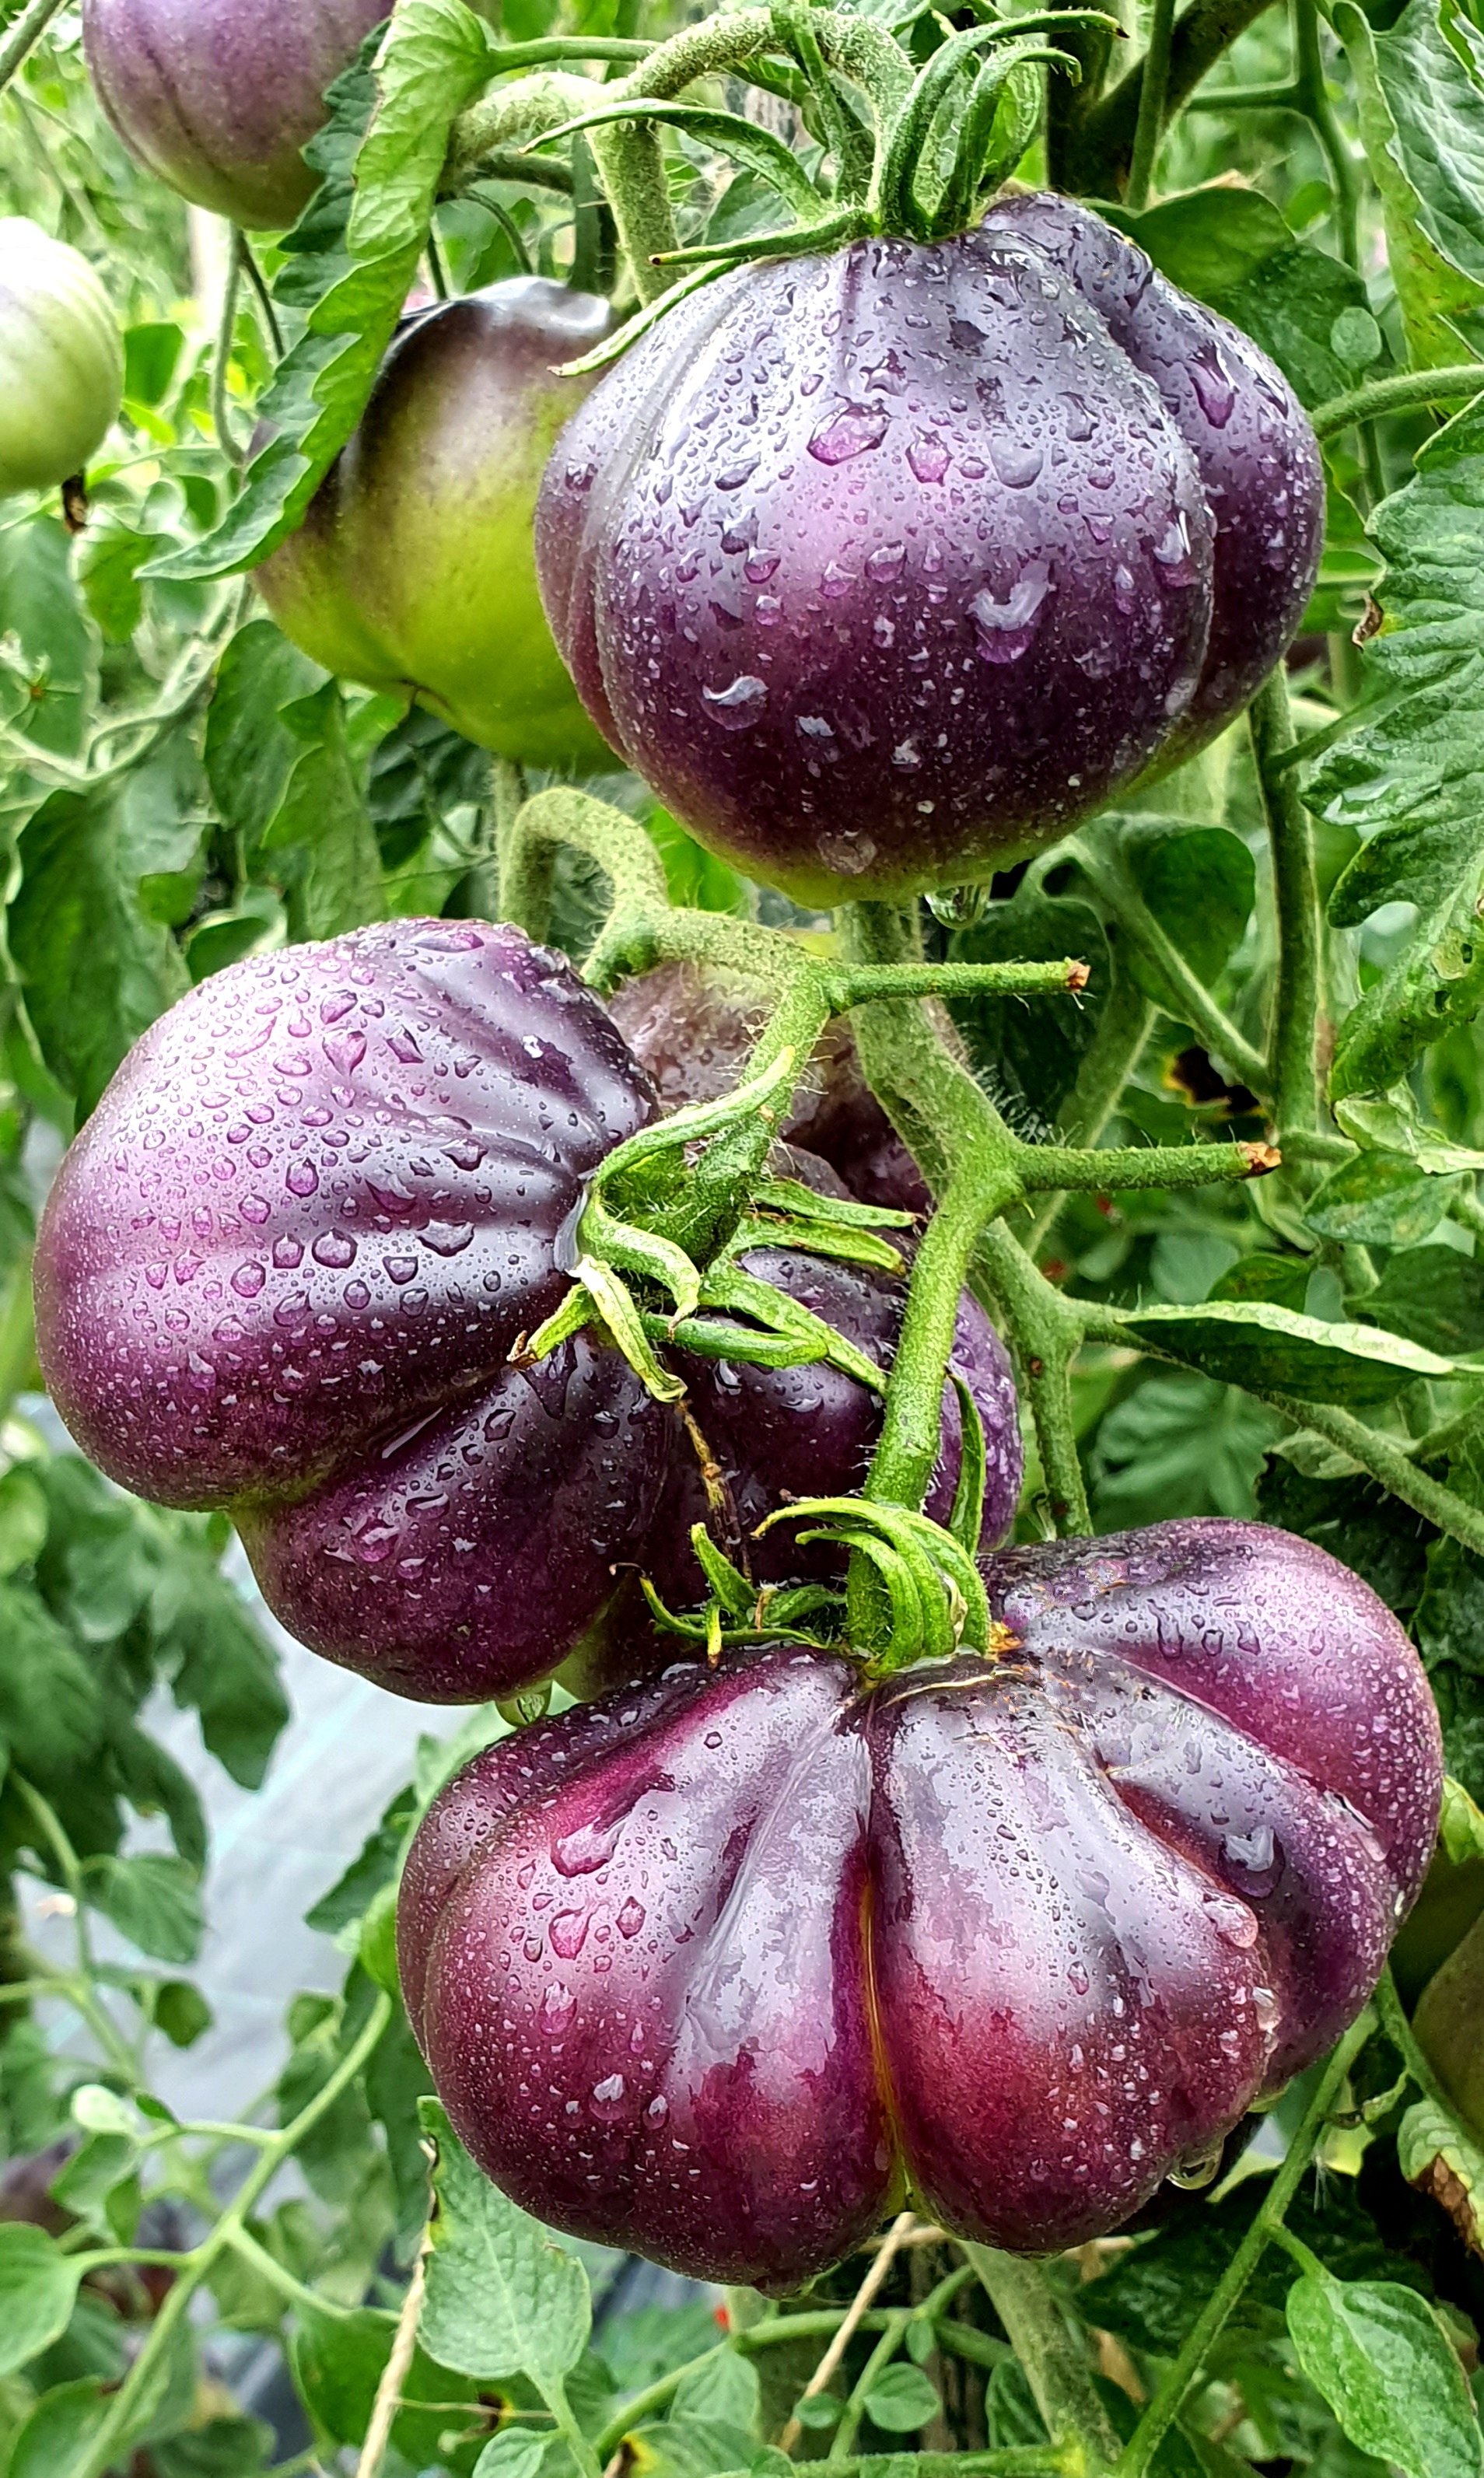 Black and Blue tomatoes: BLUE PEAR Tomato